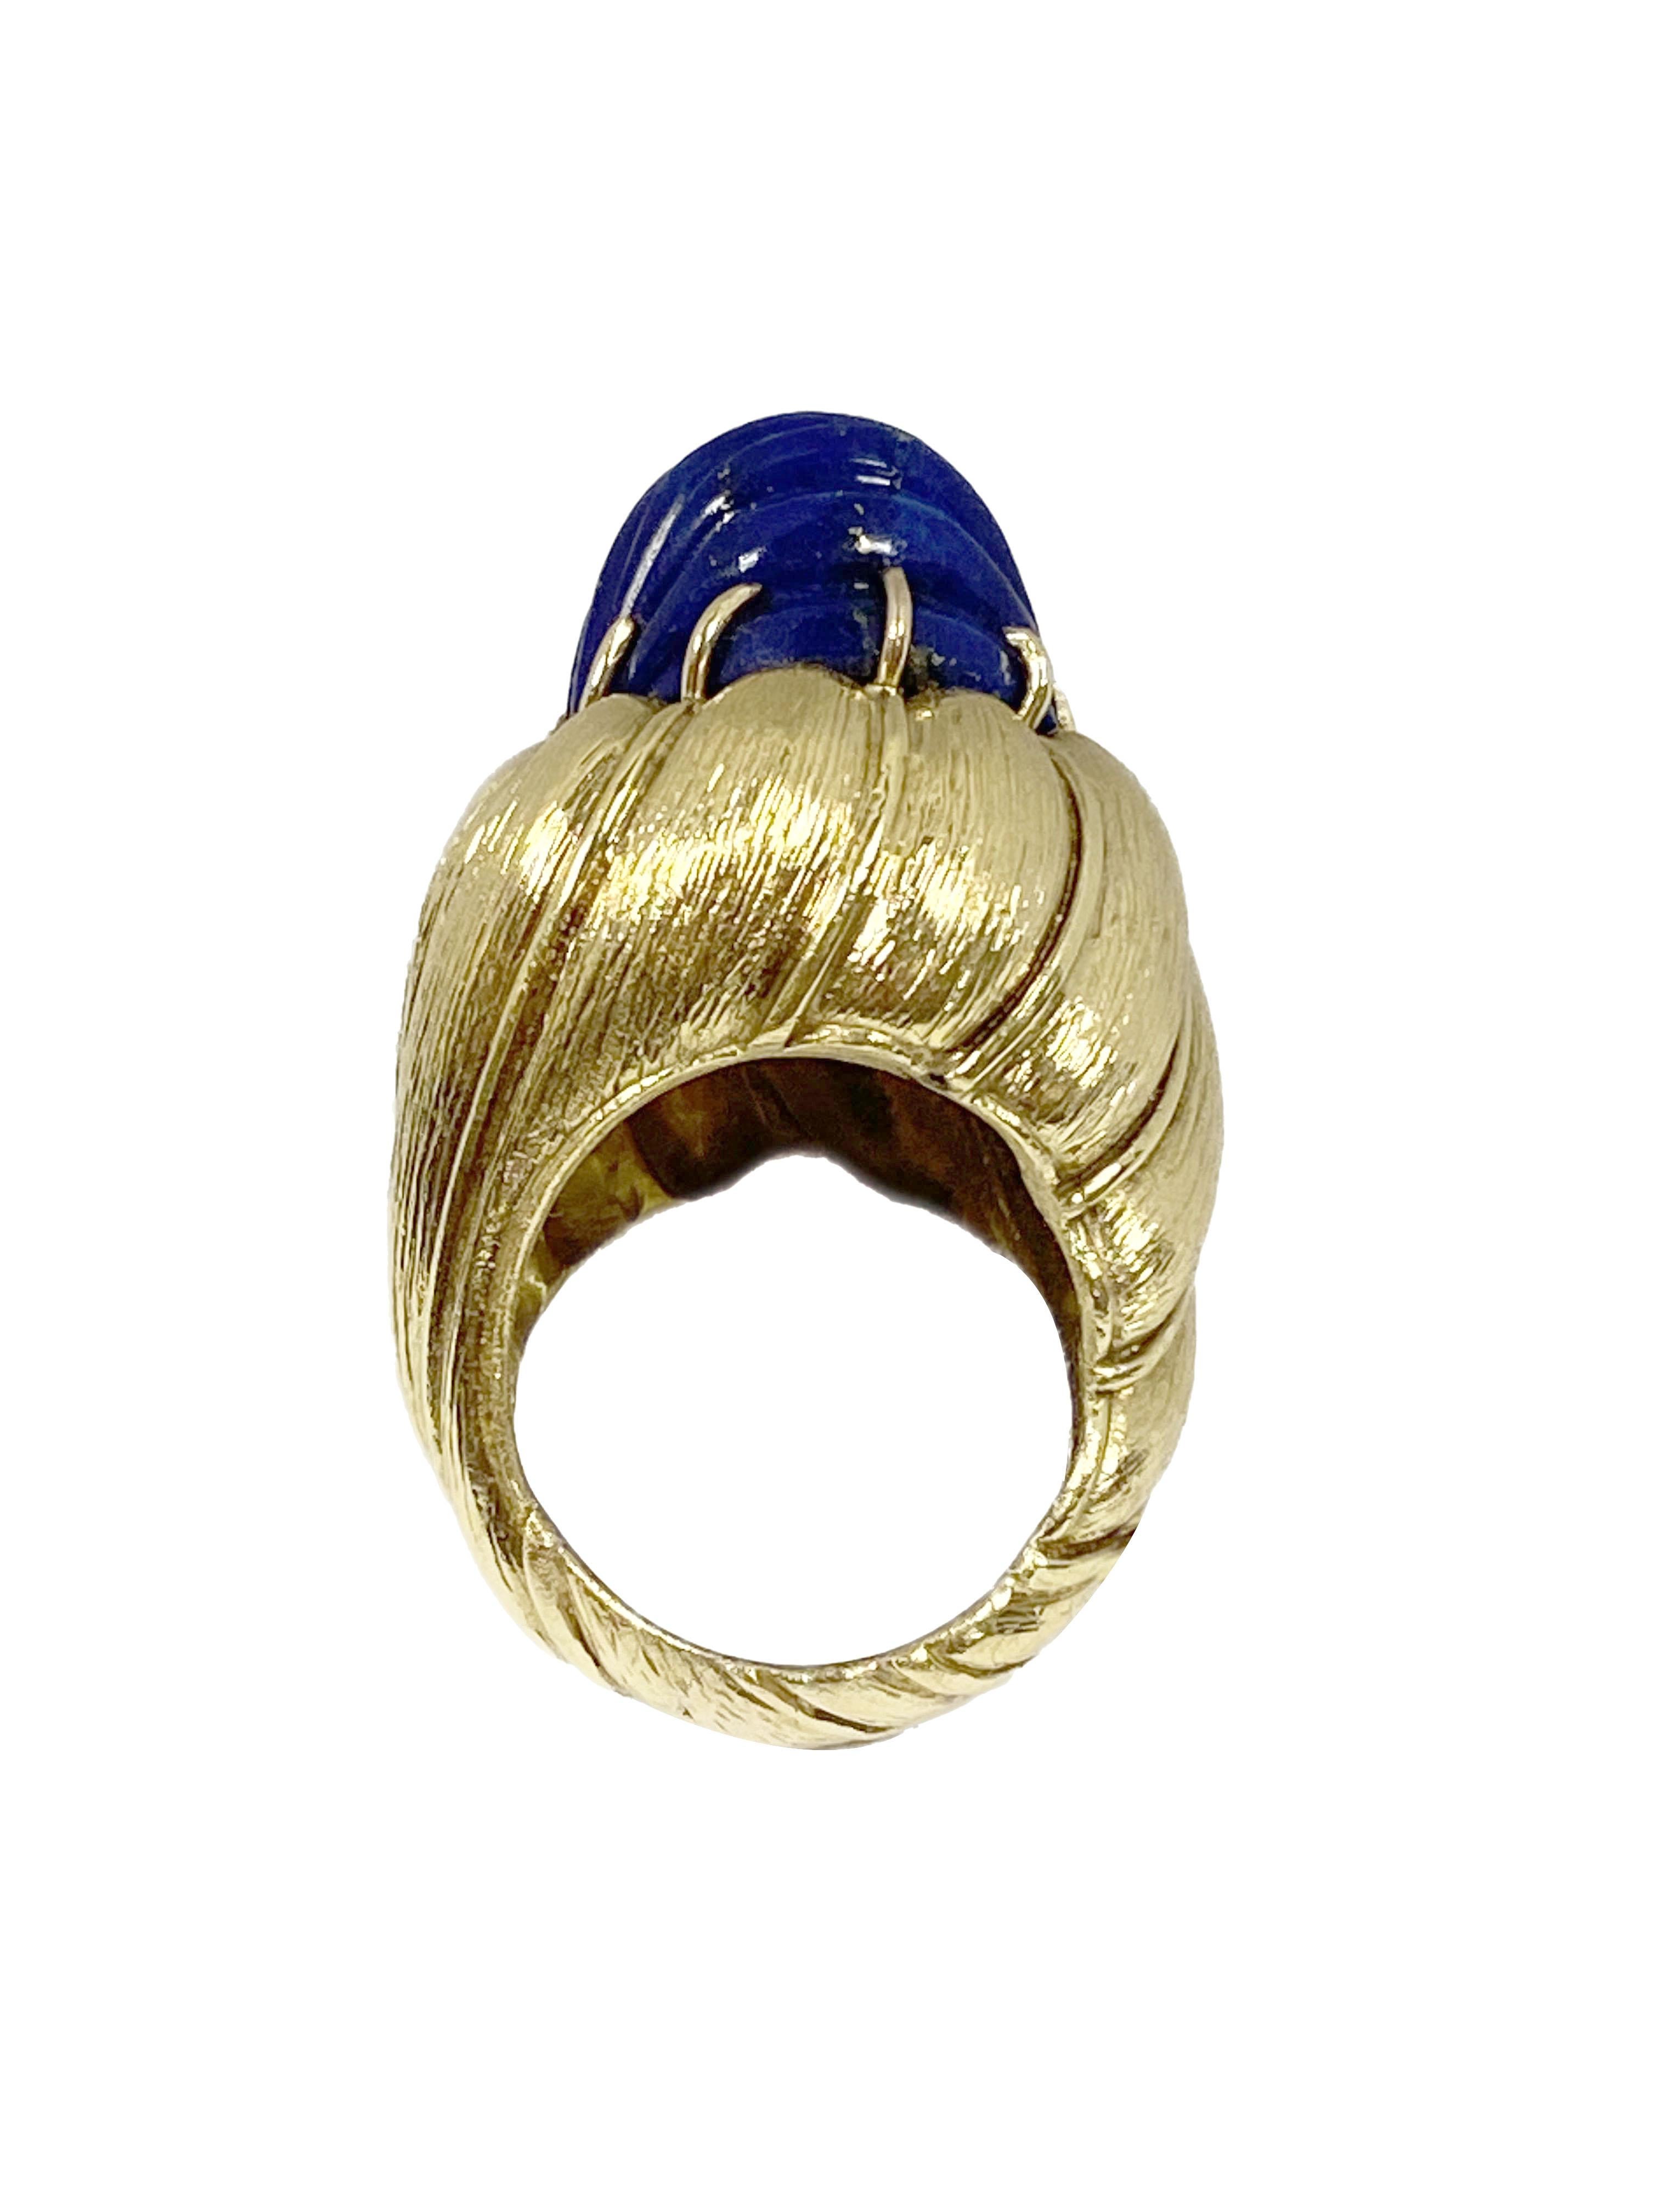 Circa 1970 18K Yellow Gold statement Ring, the top measures 1 inch in length X 7/8 inch, set with a Domed Scalloped Lapis Lazulli. Weighing 33.6 Grams and is a finger size 6. 